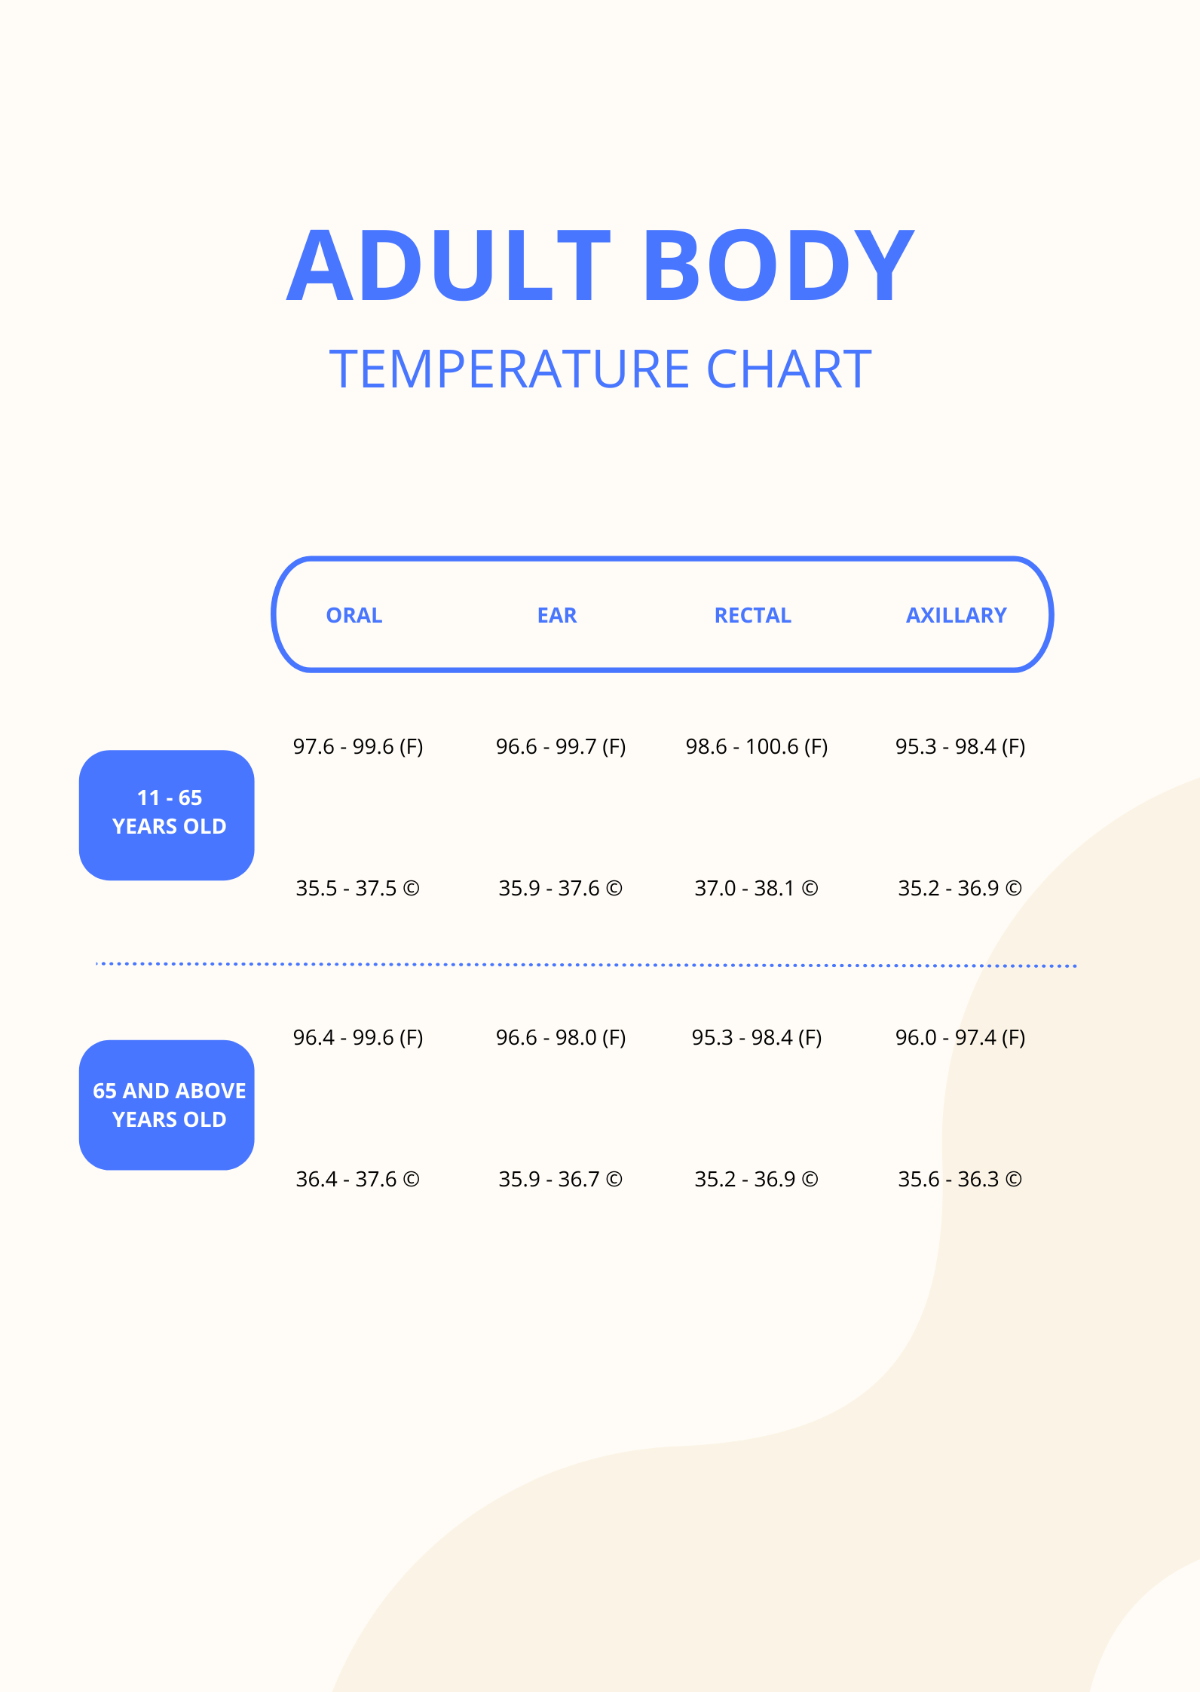 Adult Body Temperature Chart Template